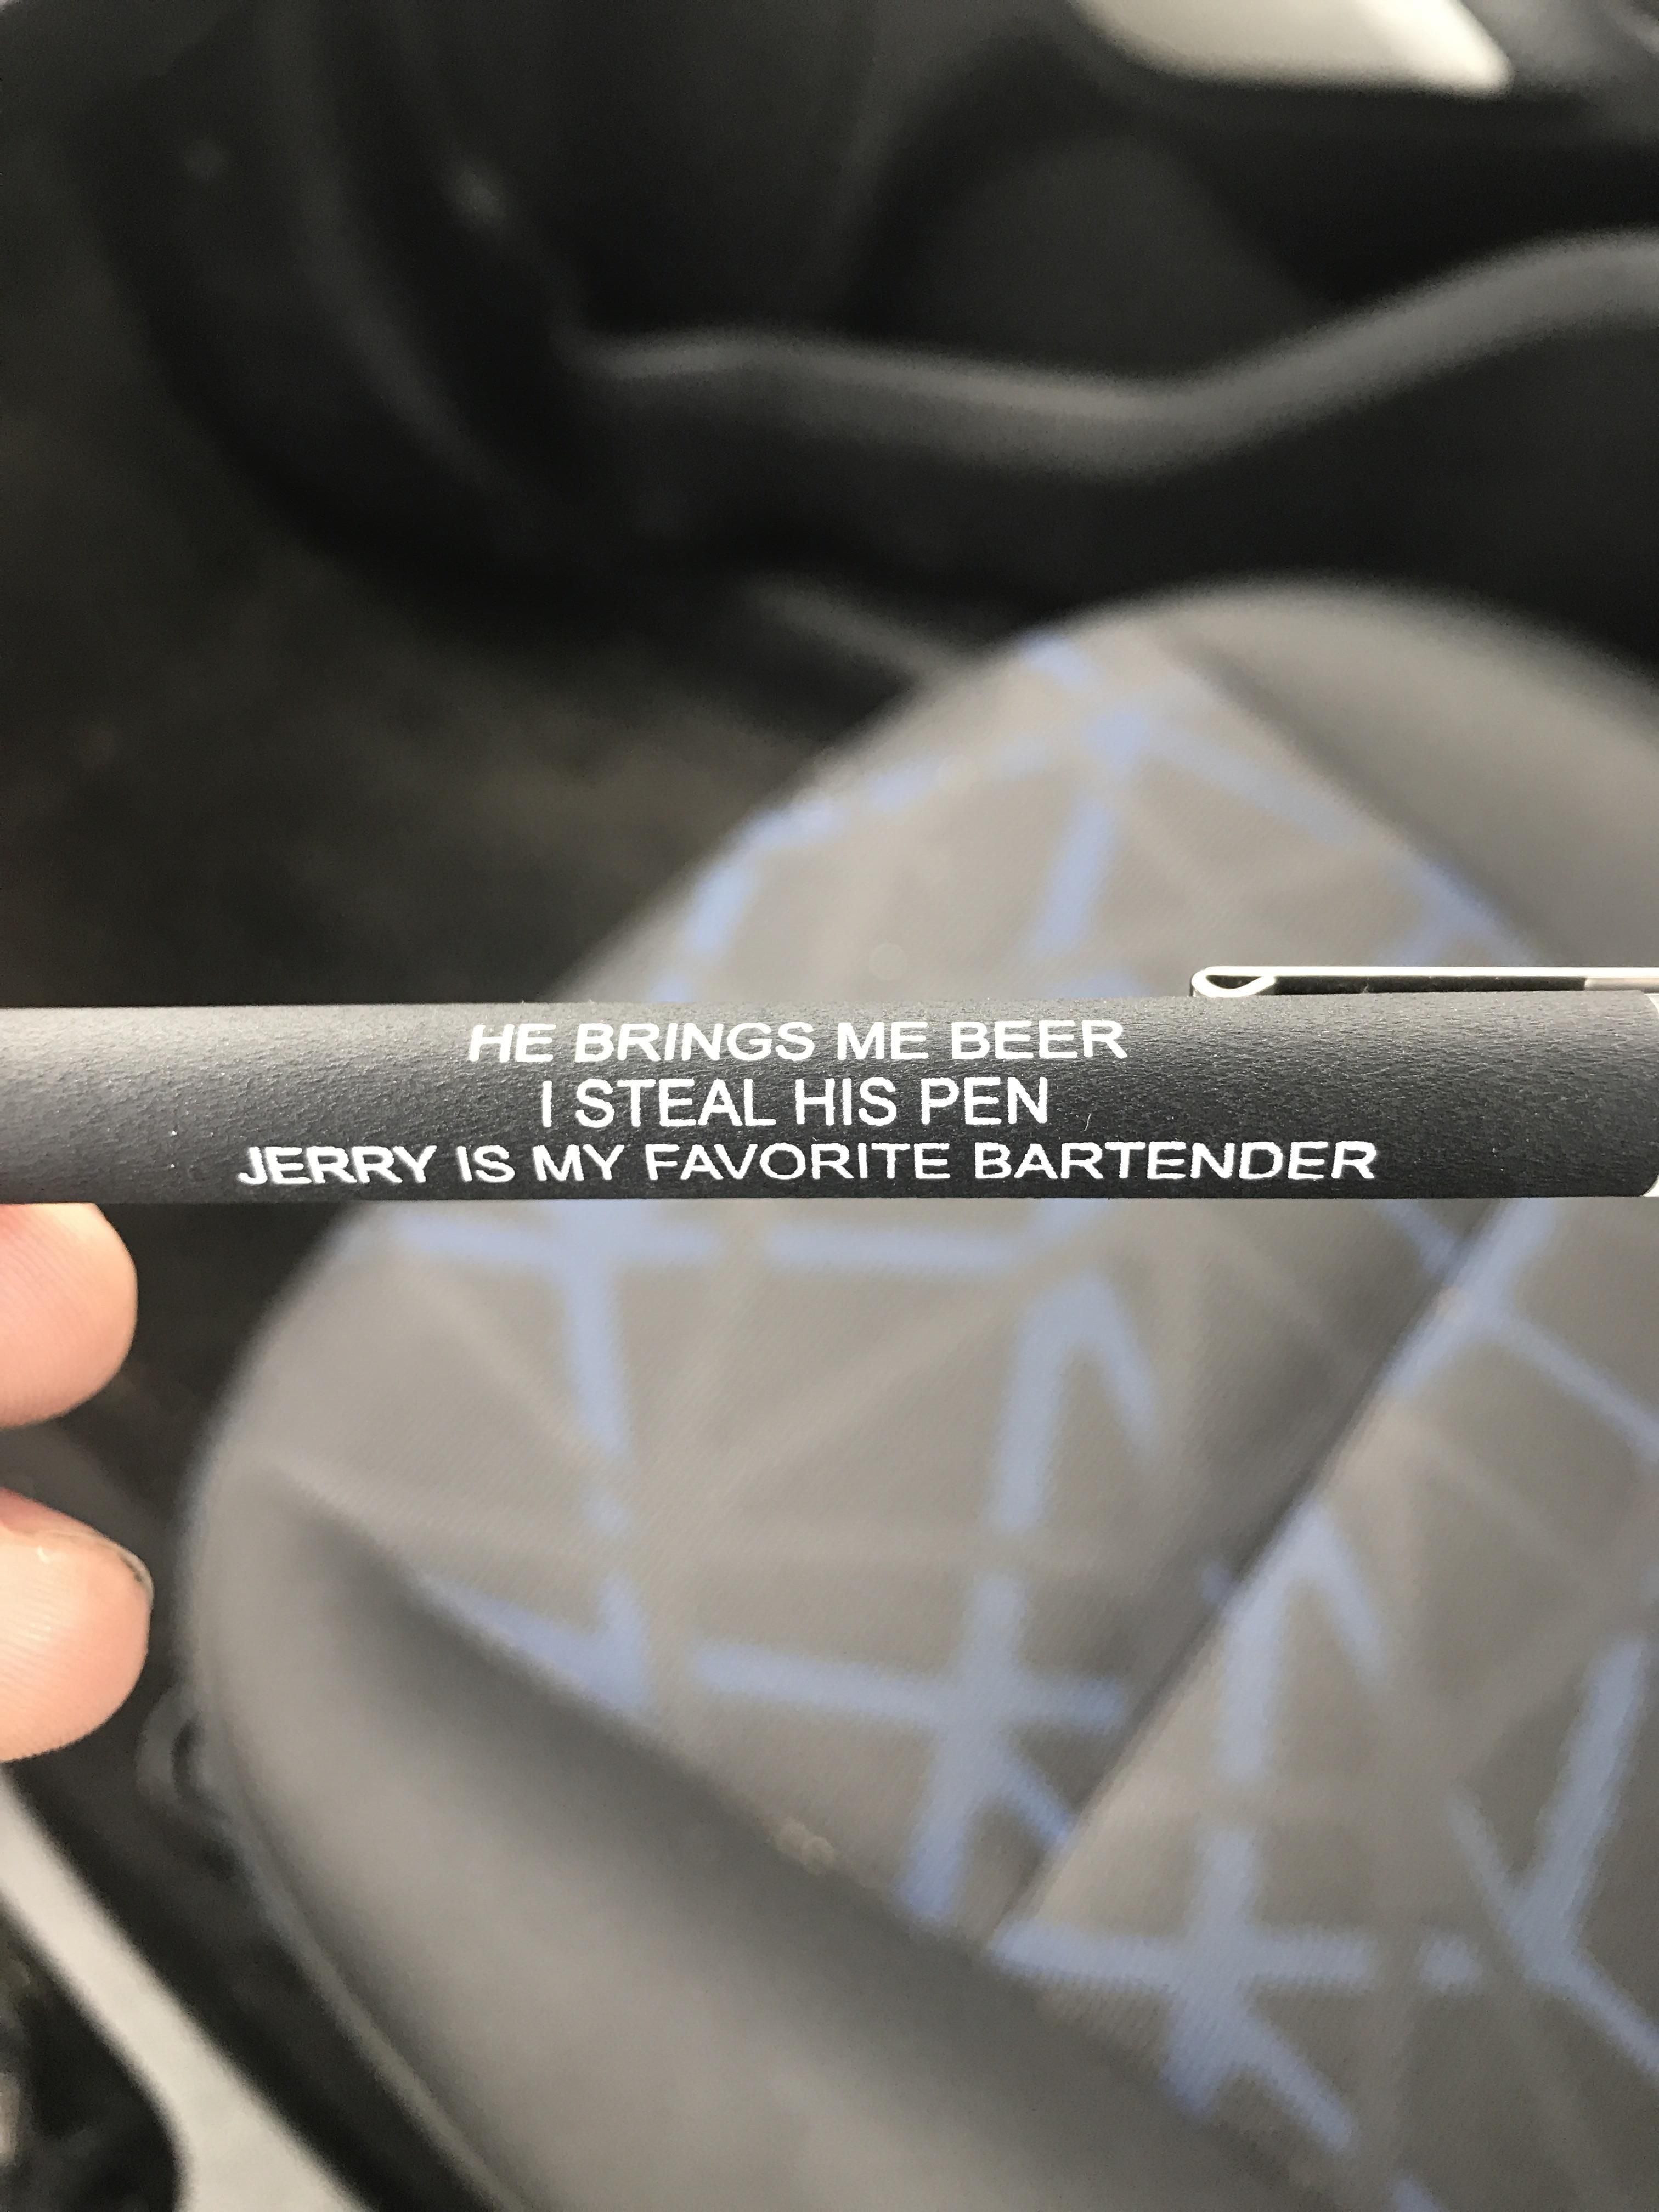 Didn’t notice until after I stole the pen. Good work Jerry.